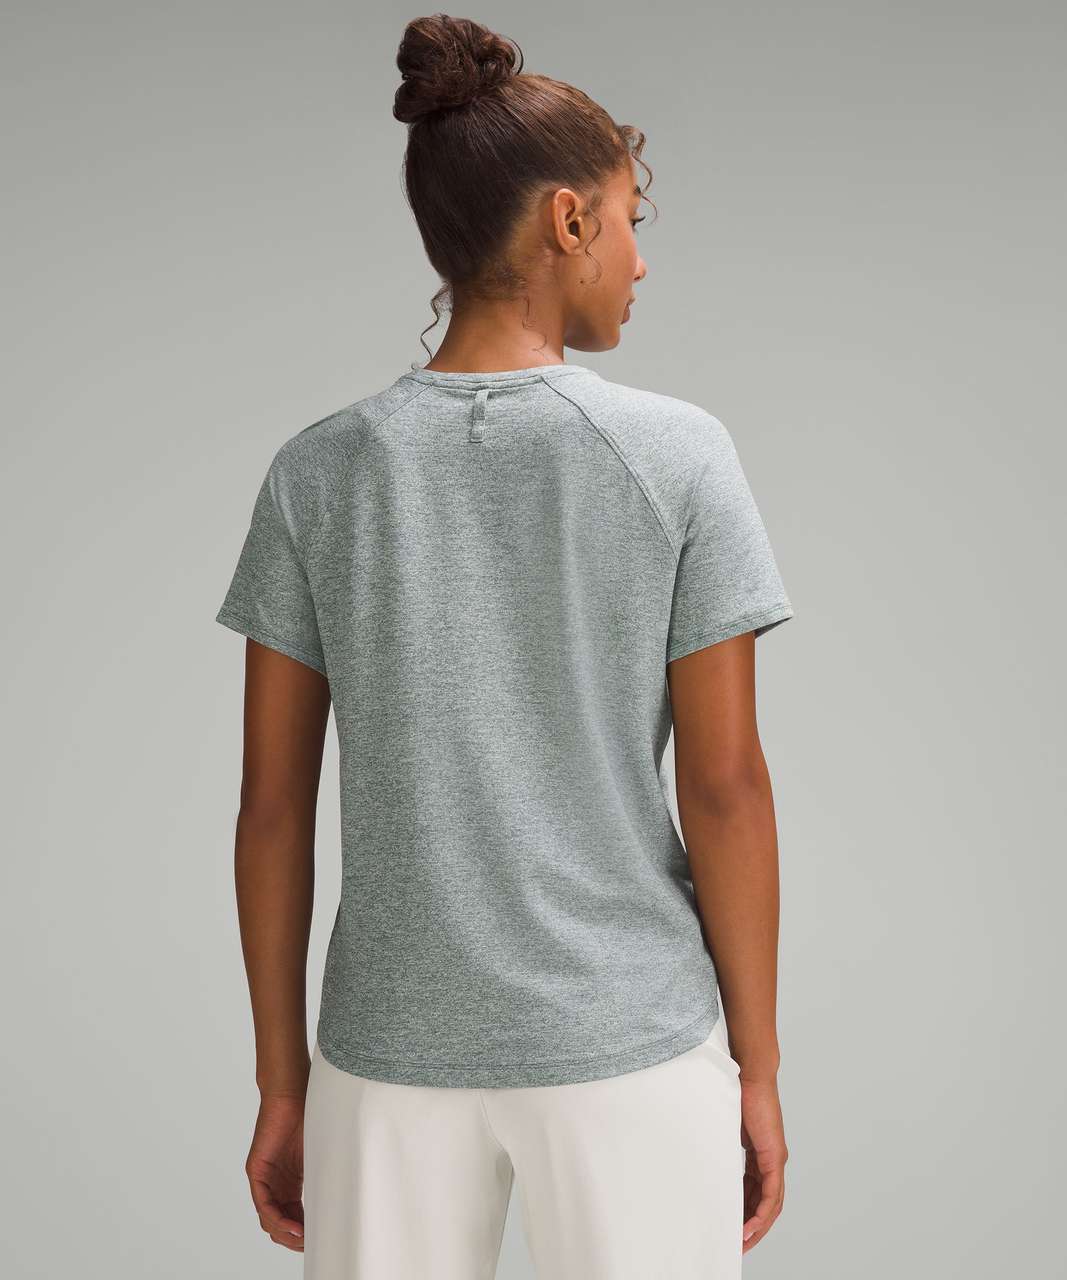 Lululemon License to Train Classic-Fit T-Shirt - Heathered Medium Forest